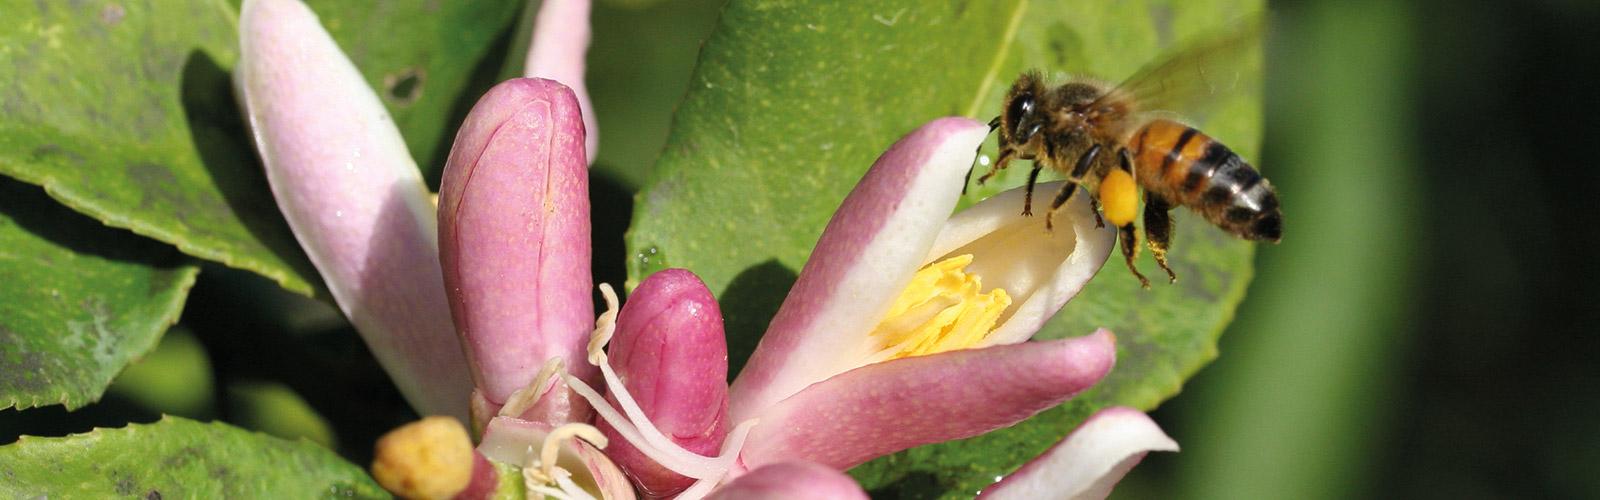 Bee on a citron flower, Guadeloupe. D. Bazille © CIRAD